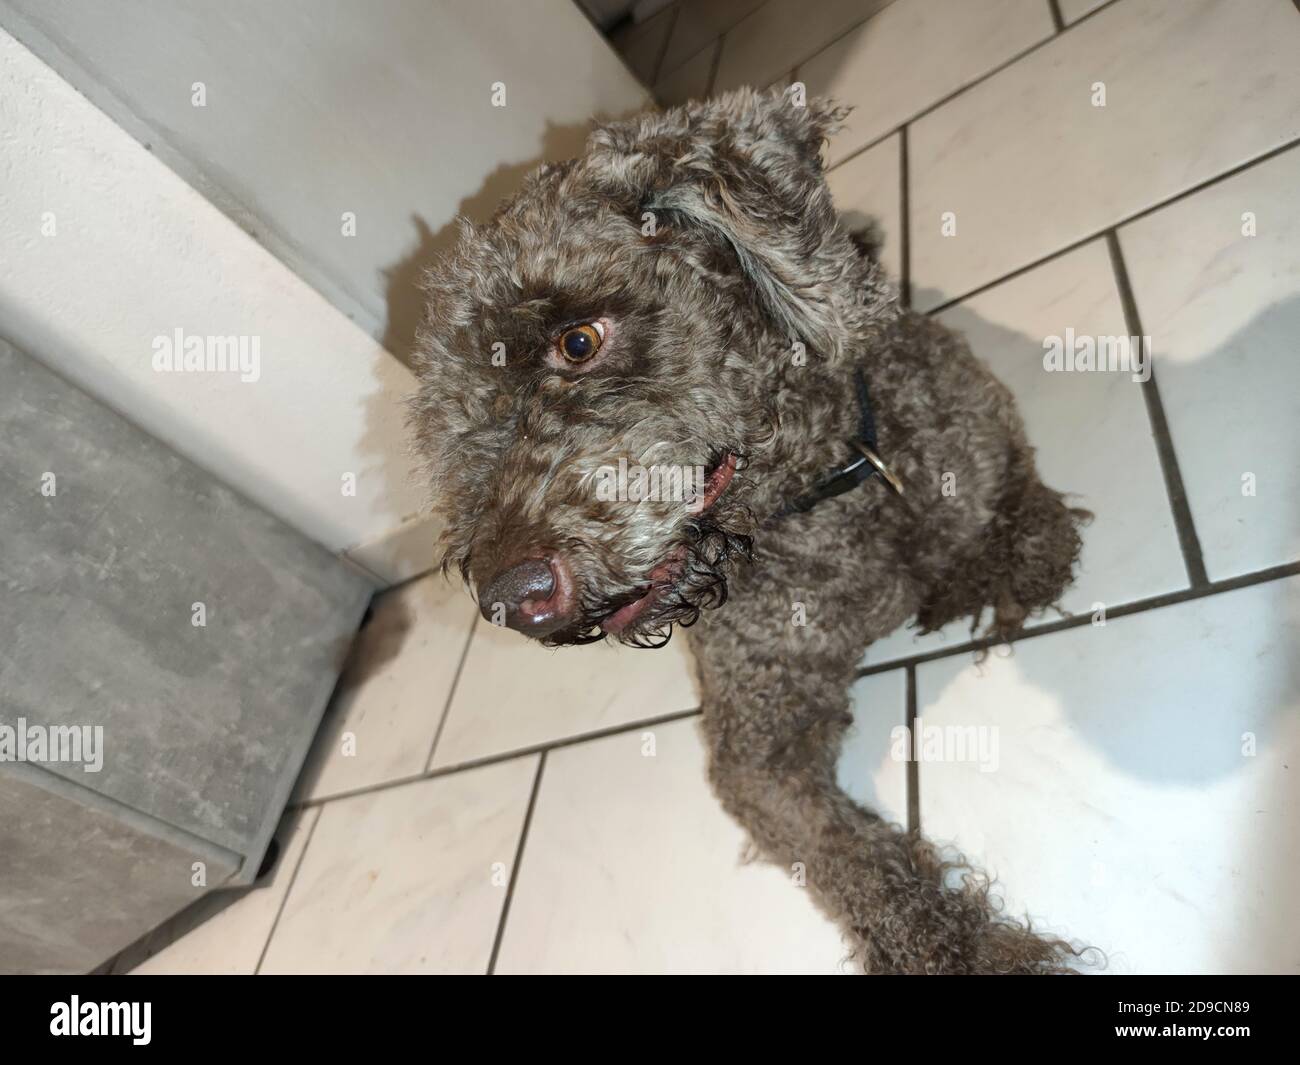 Sitting dog profile brown lagotto romagnolo truffle breed close up background modern high quality prints Stock Photo